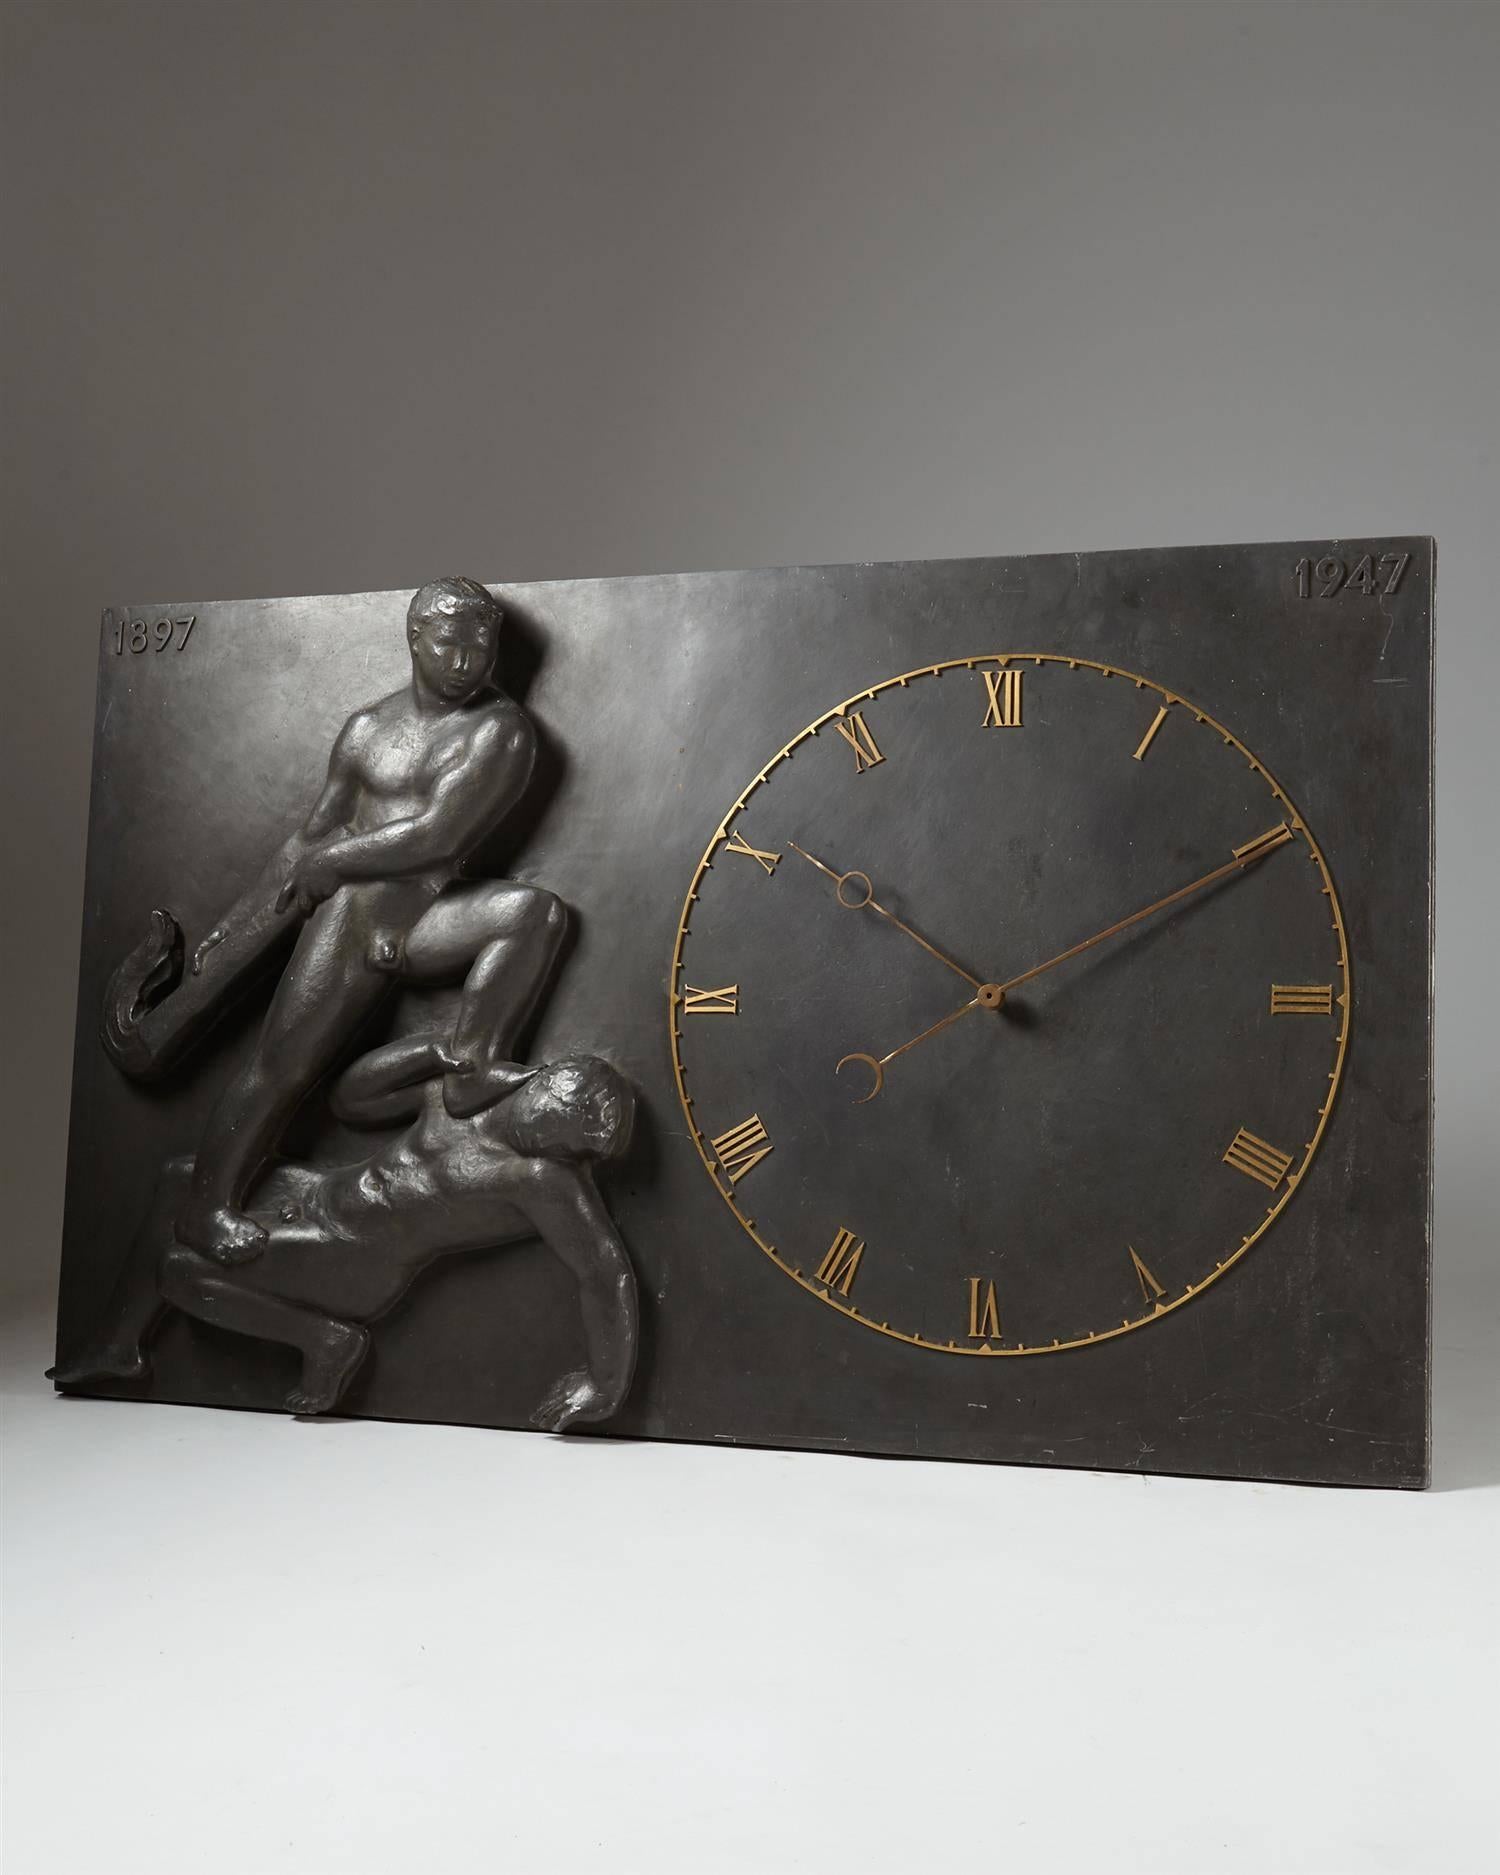 Monumental wall clock, anonymous,
Denmark. 1947.

Pewter and brass.

Measurements: 
H: 78 cm/ 30 3/4''
L: 130 cm/ 51 1/4''